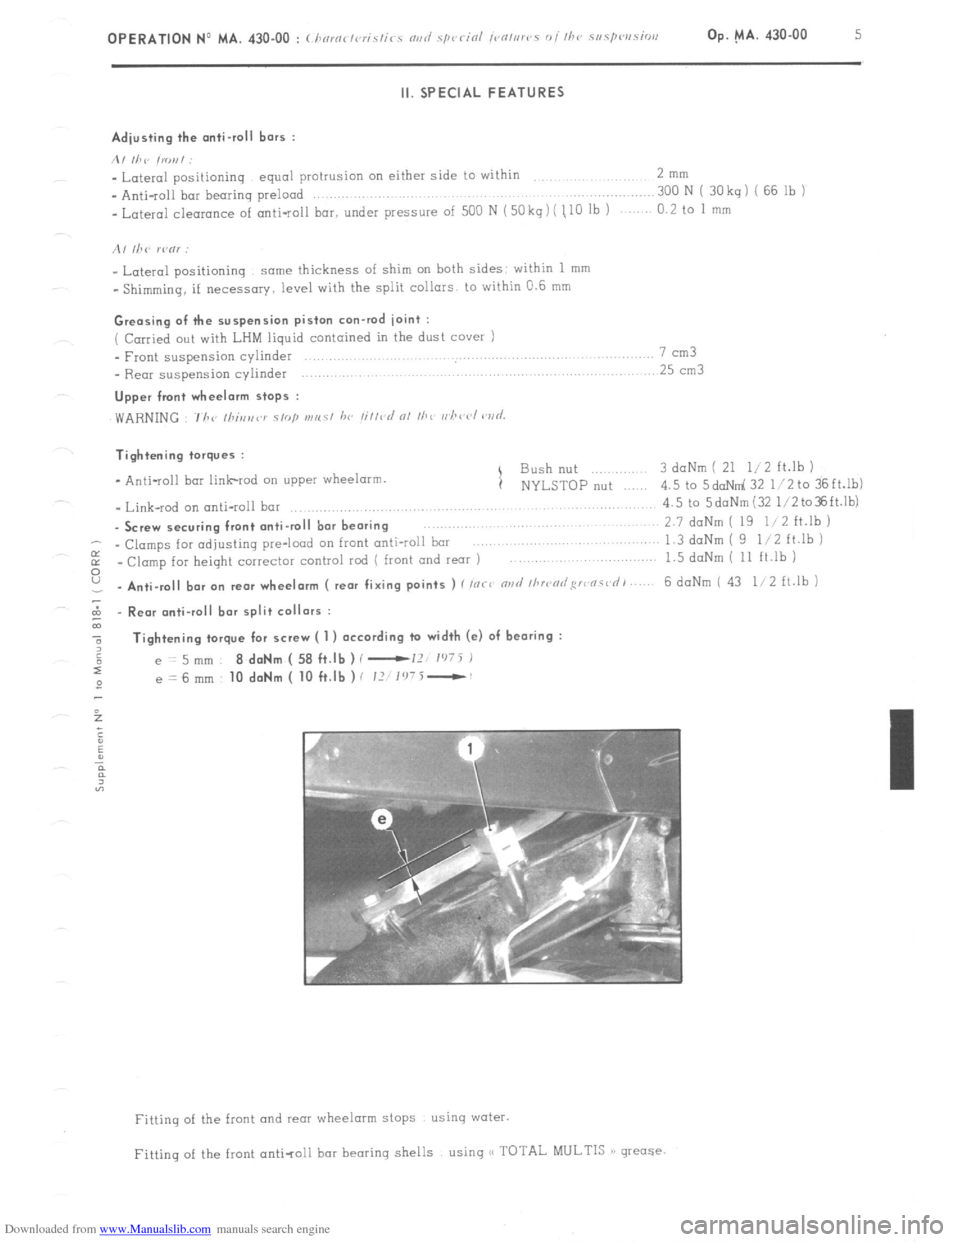 Citroen CX 1982 1.G Workshop Manual Downloaded from www.Manualslib.com manuals search engine OPERATION No MA. 430.00 : c ,,<,,a< ,<,r;s,;rs mi/ .s/wrin/ ,vn/srrs oi /he srmf~rw.~ion Op. MA. 430-00 5 
II. SPECIAL FEATURES 
Adjusting the 